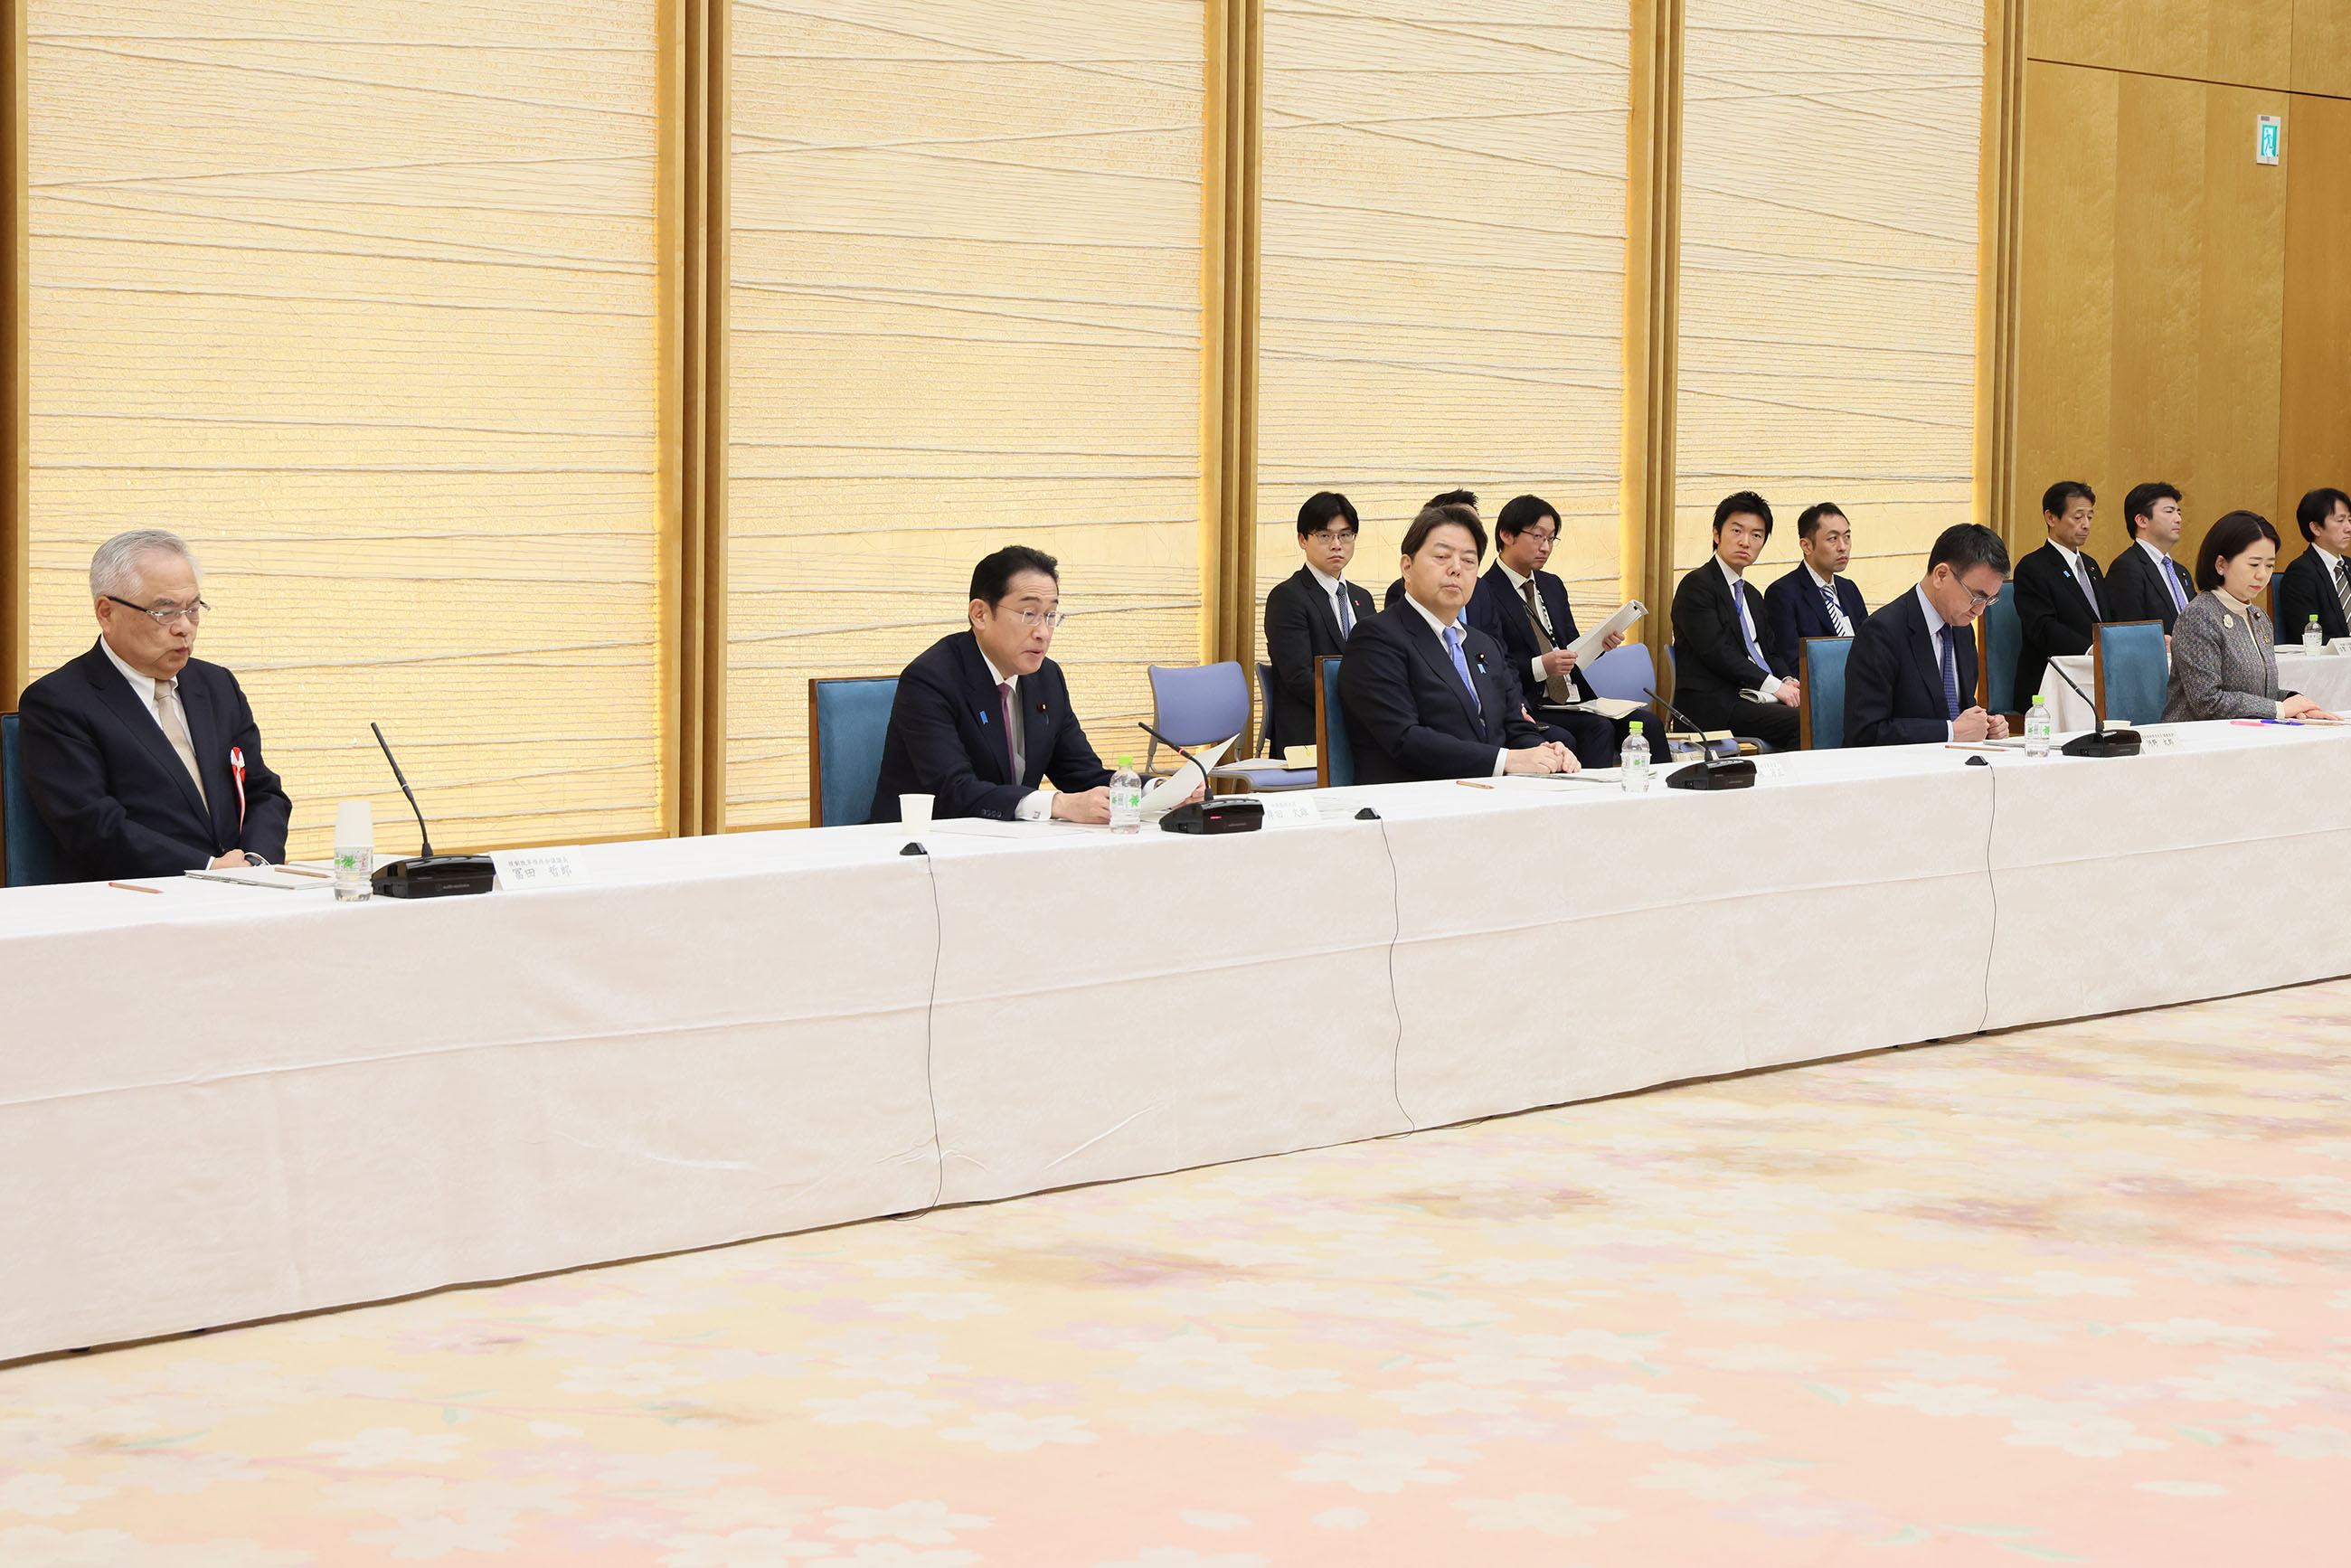 Prime Minister wrapping up a meeting (4)